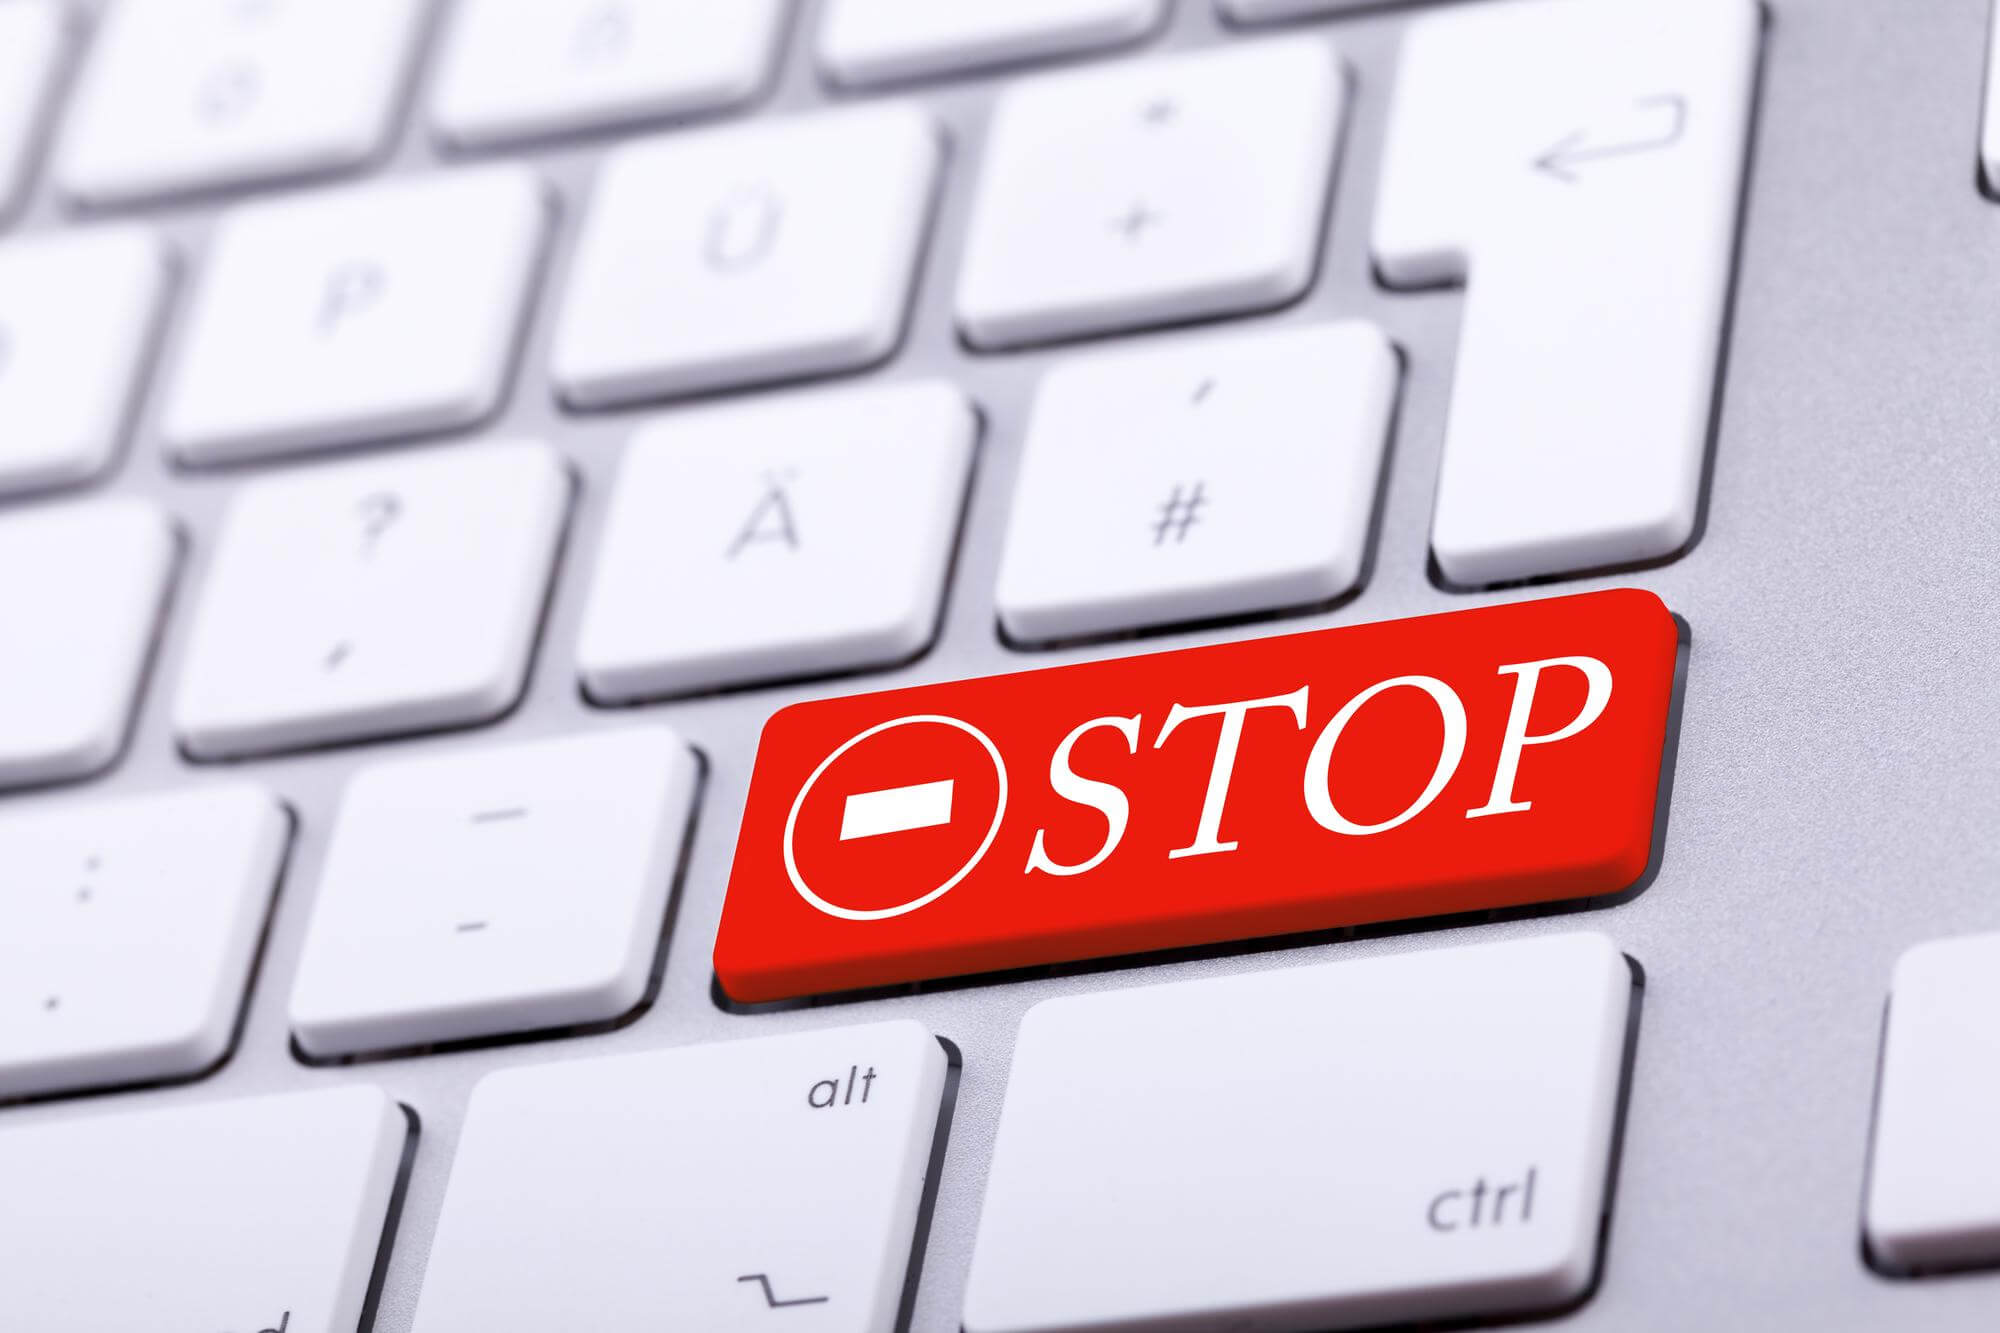 aluminium keyboard with stop word sign red studio photo standard keyboard close up shooting with blurred background alert